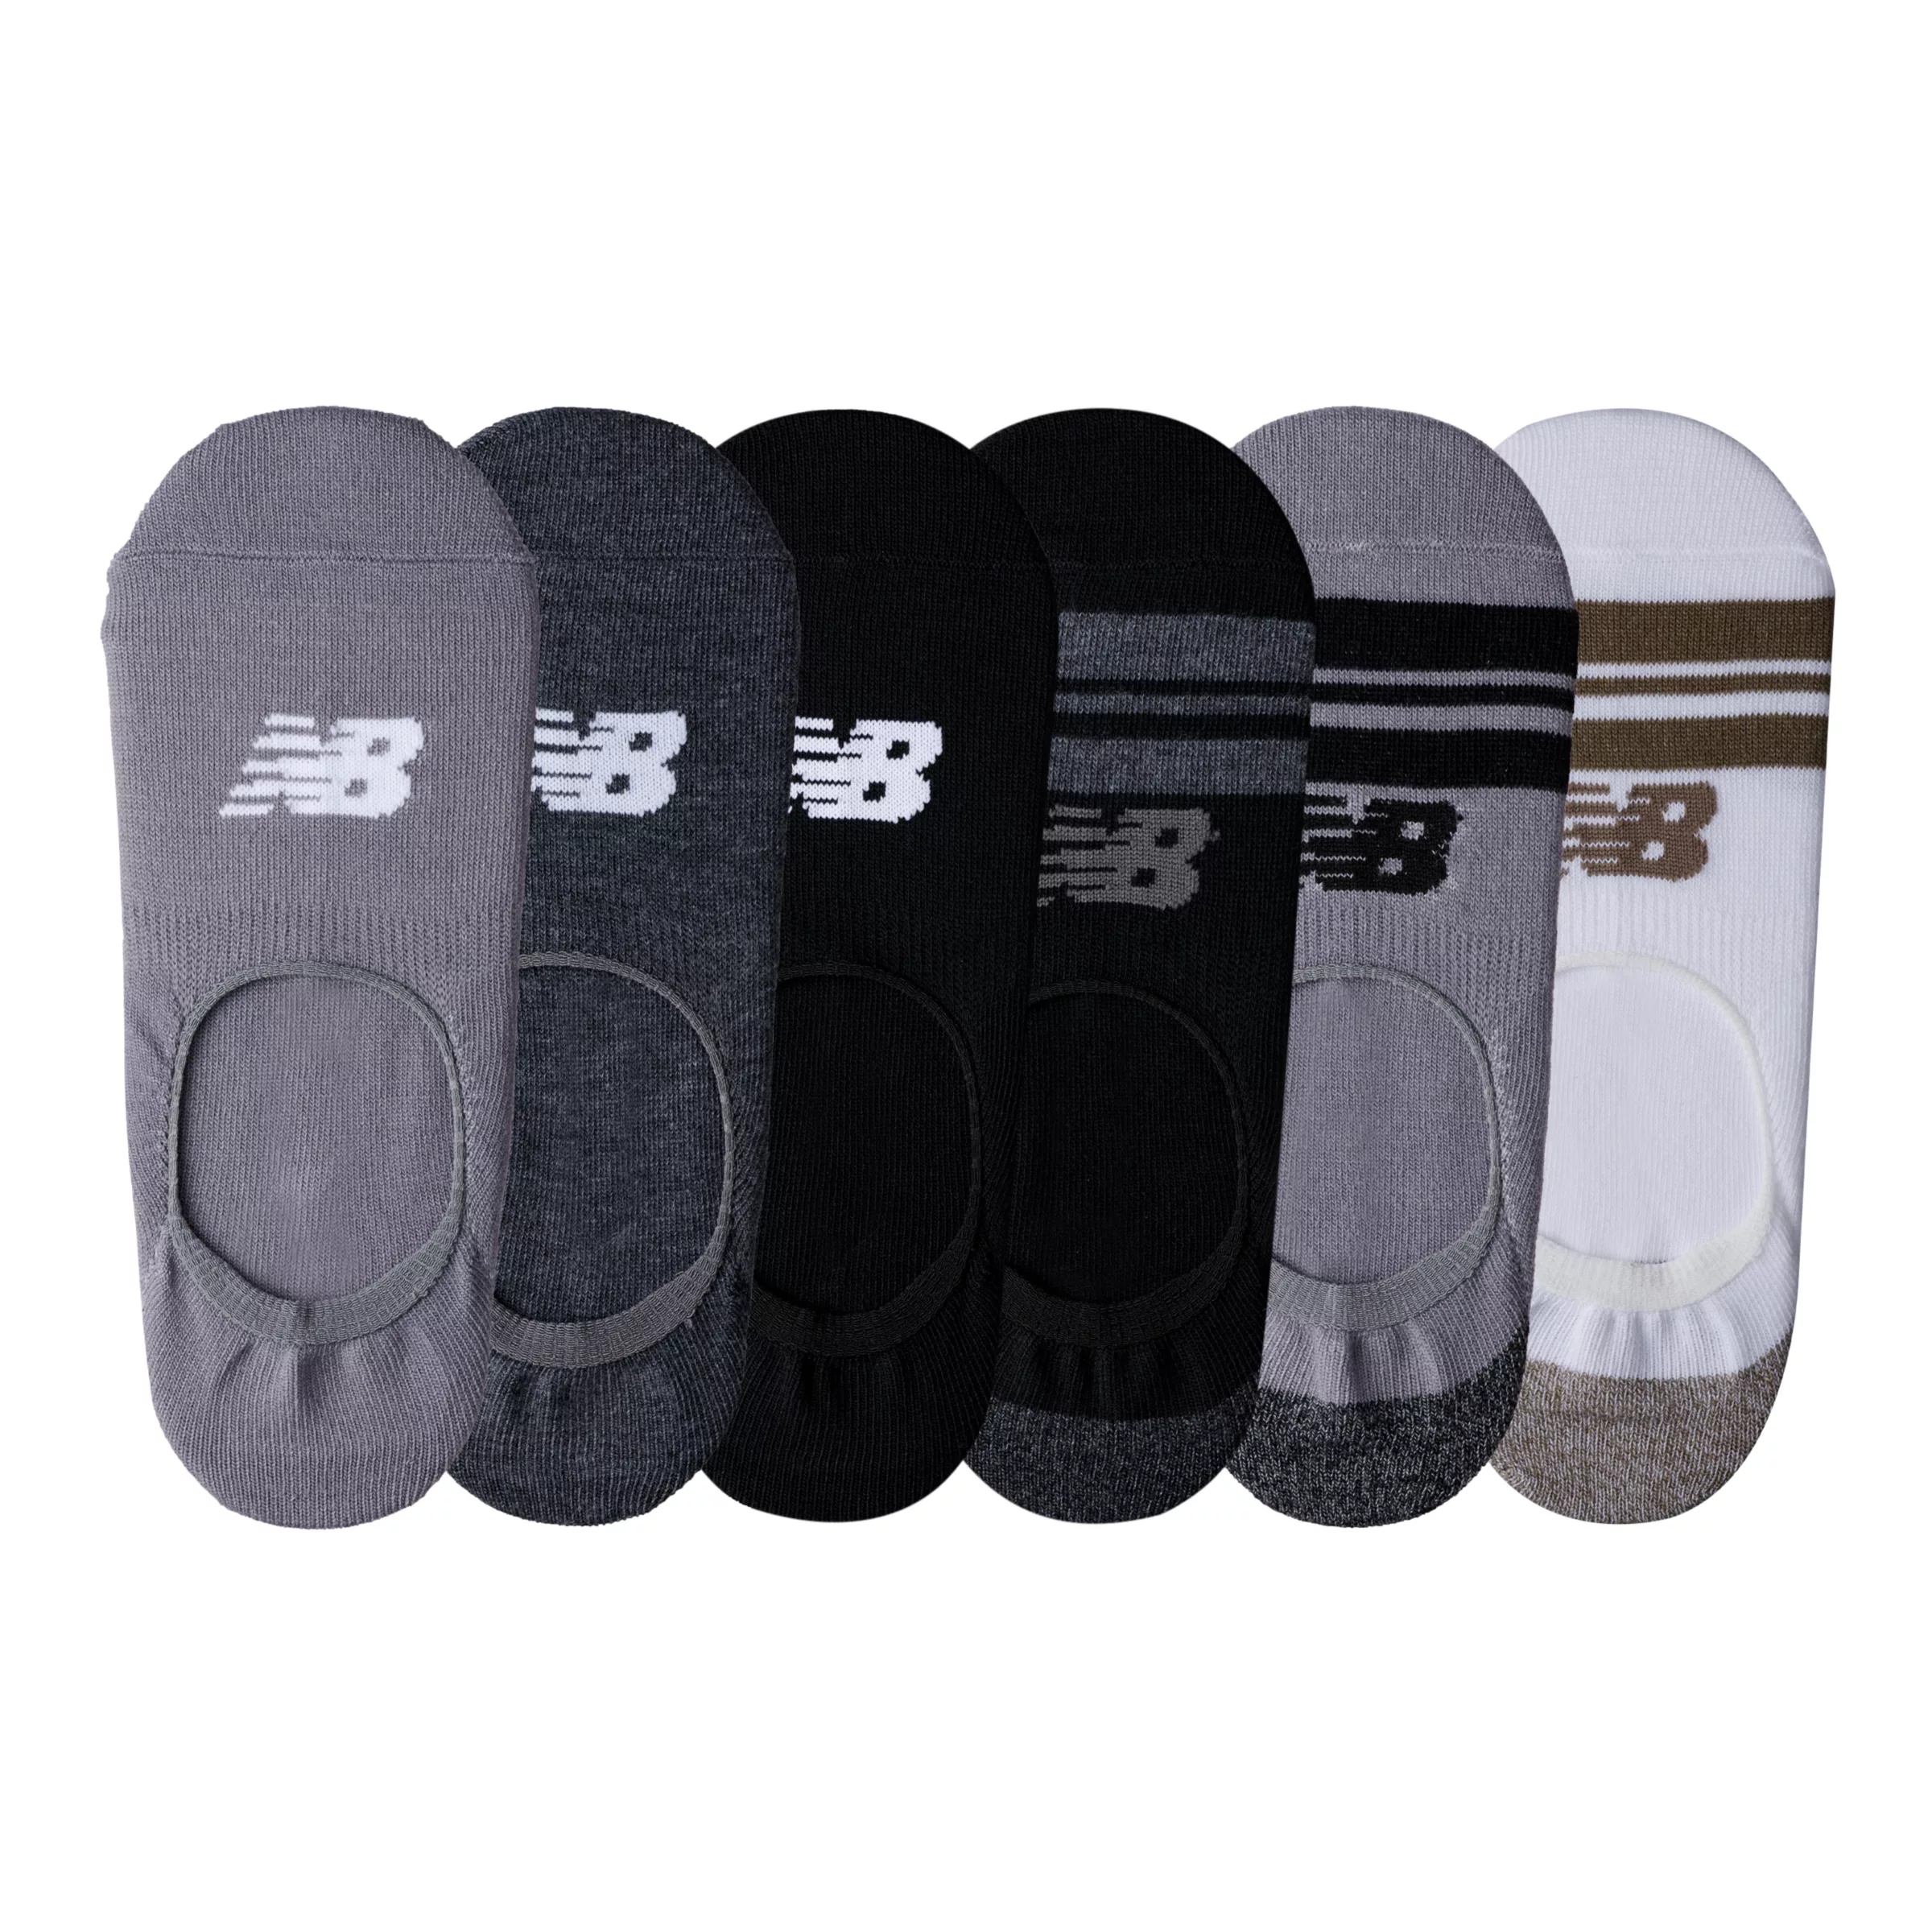 Ultra Low No Show Socks 6 Pack - 2